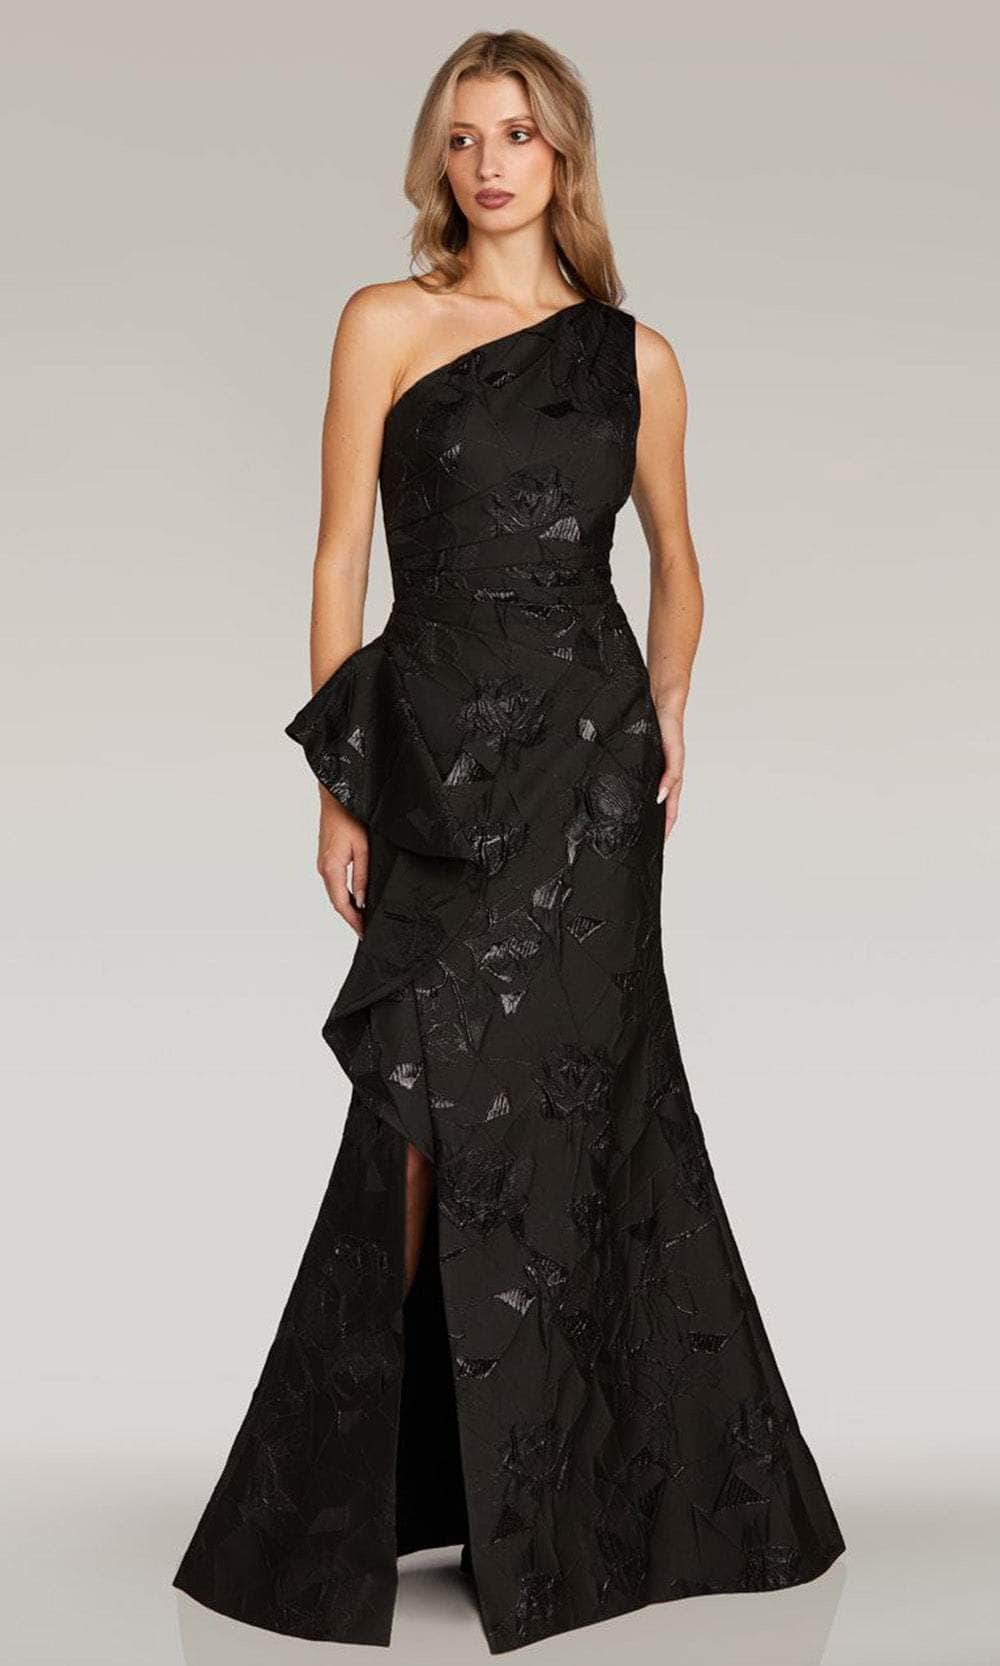 Feriani Couture 18348 - Sleeveless Jacquard Evening Gown Evening Dresses 2 / Black